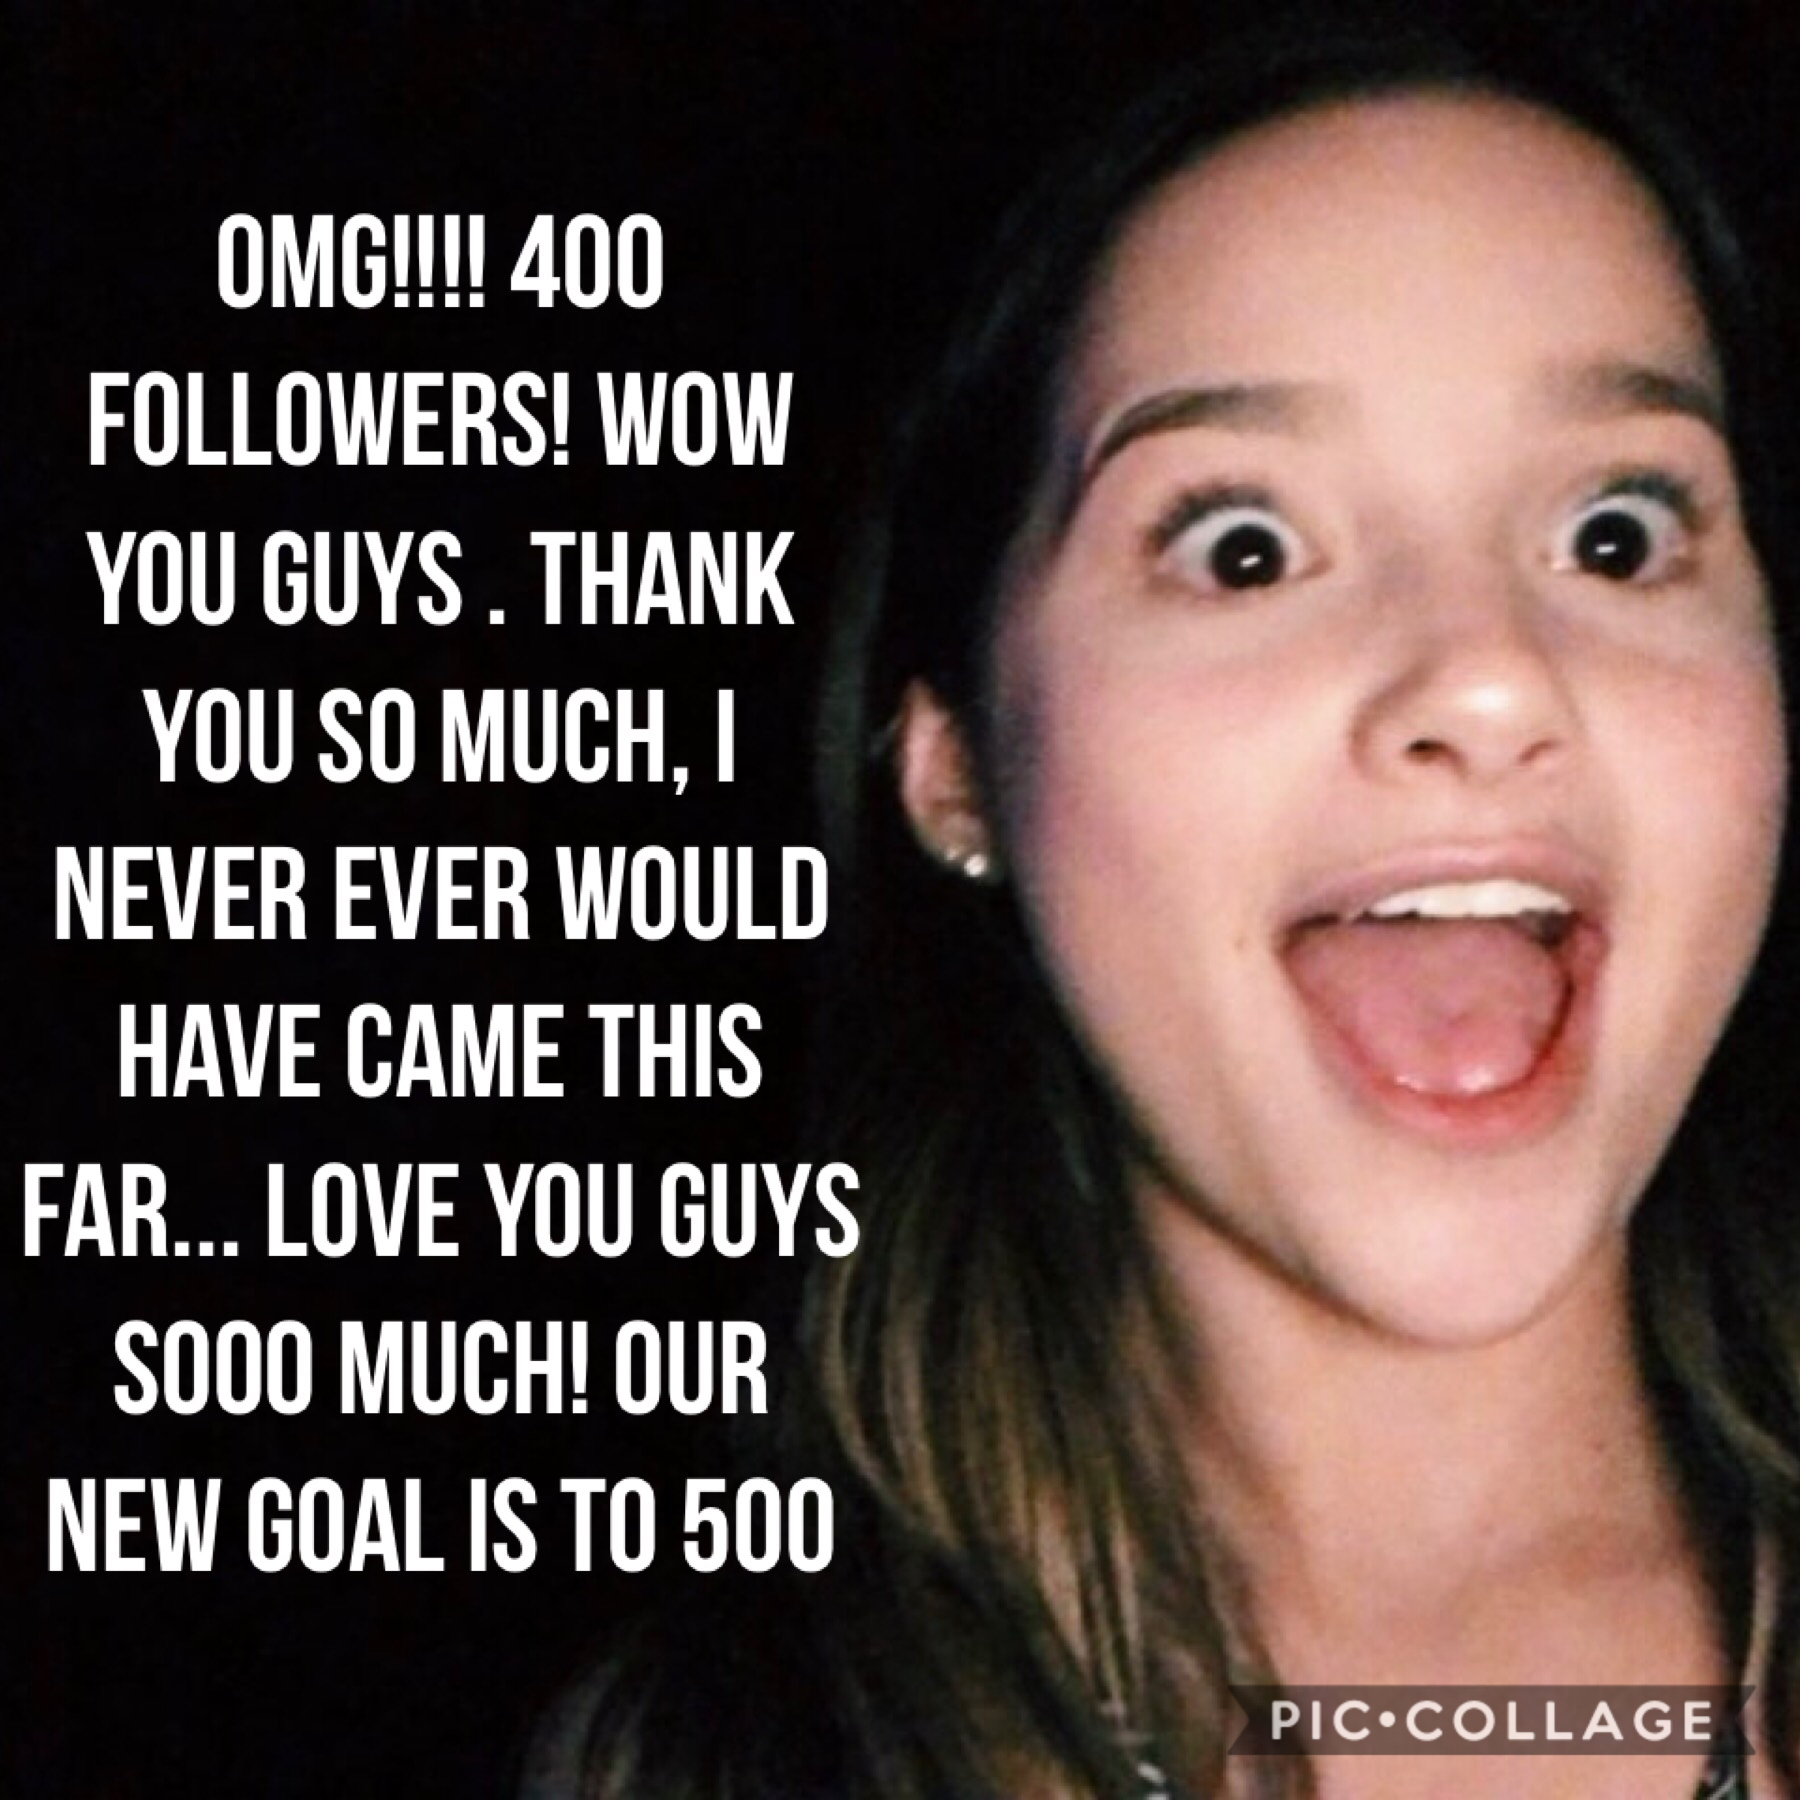 THANK YOU GUYS SO MUCH! Sorry for the horrible layout 